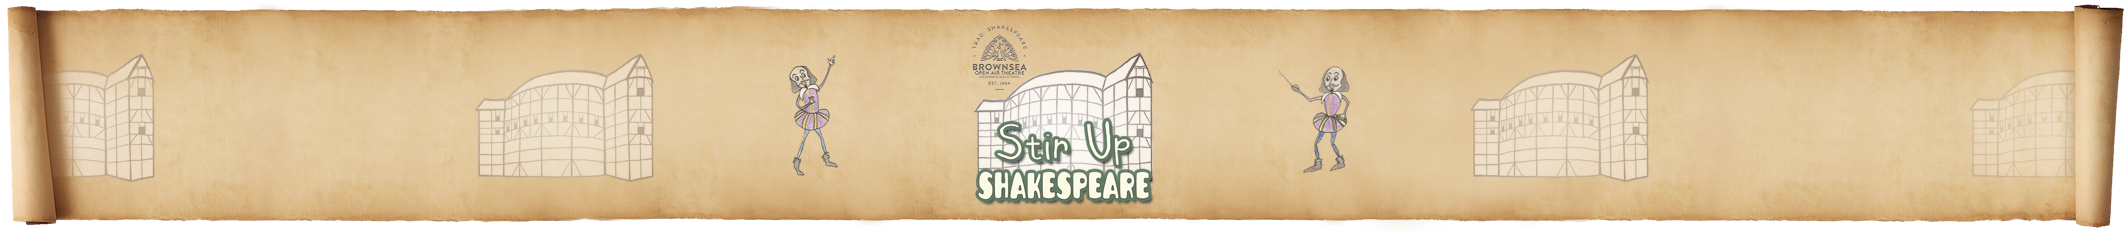 Stir-Up Shakespeare, by Brownsea Open Air Theatre